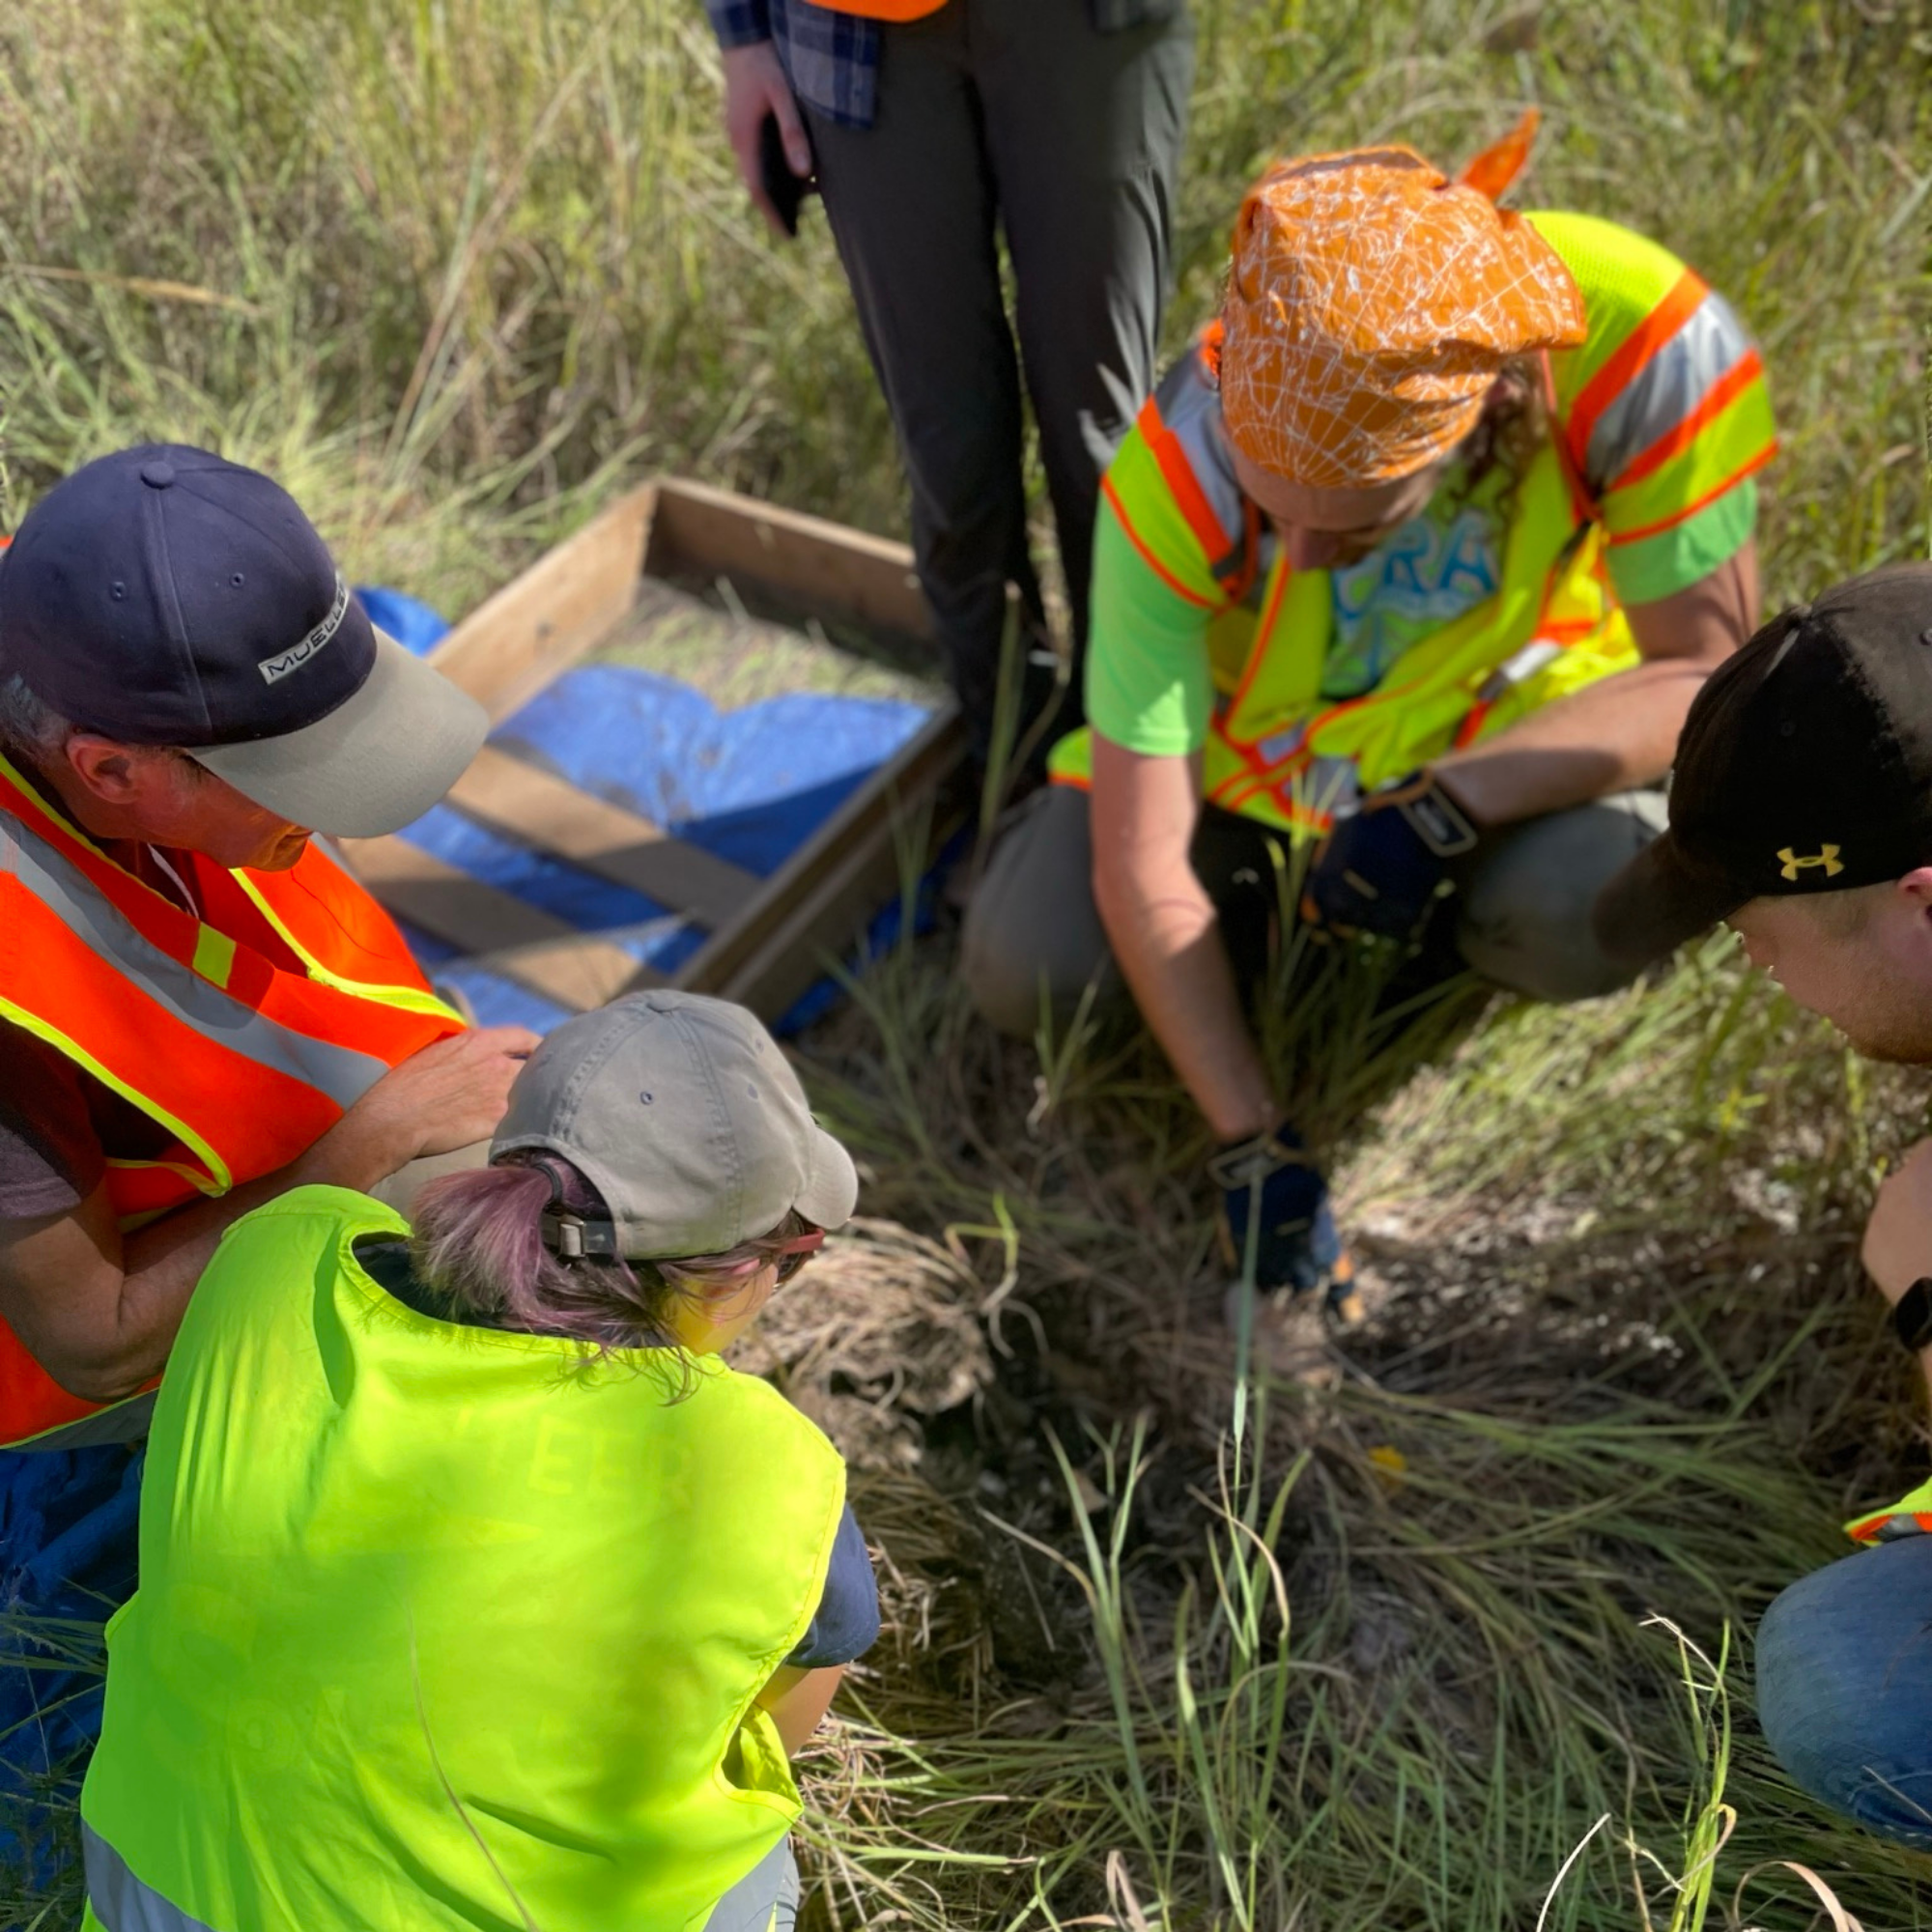 Students examine a turtle nest next to a shovel test pit